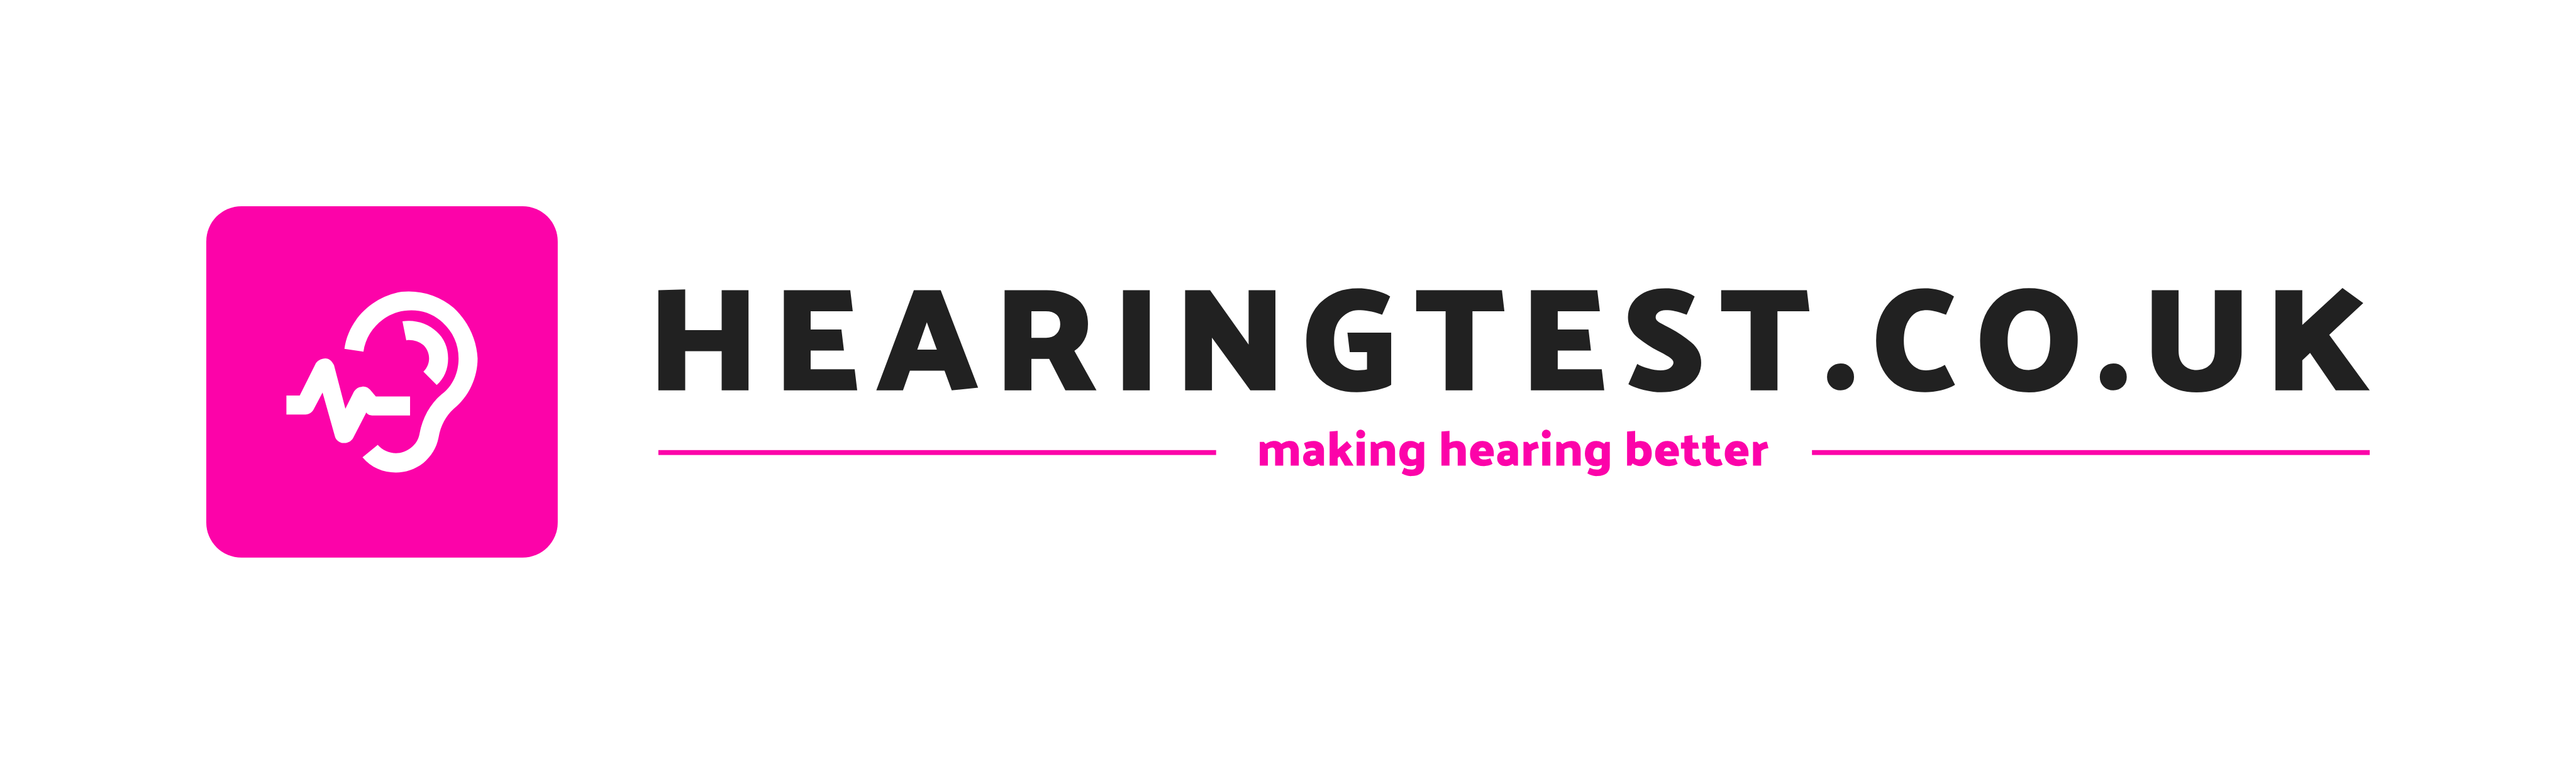 Get Your Free Hearing Test